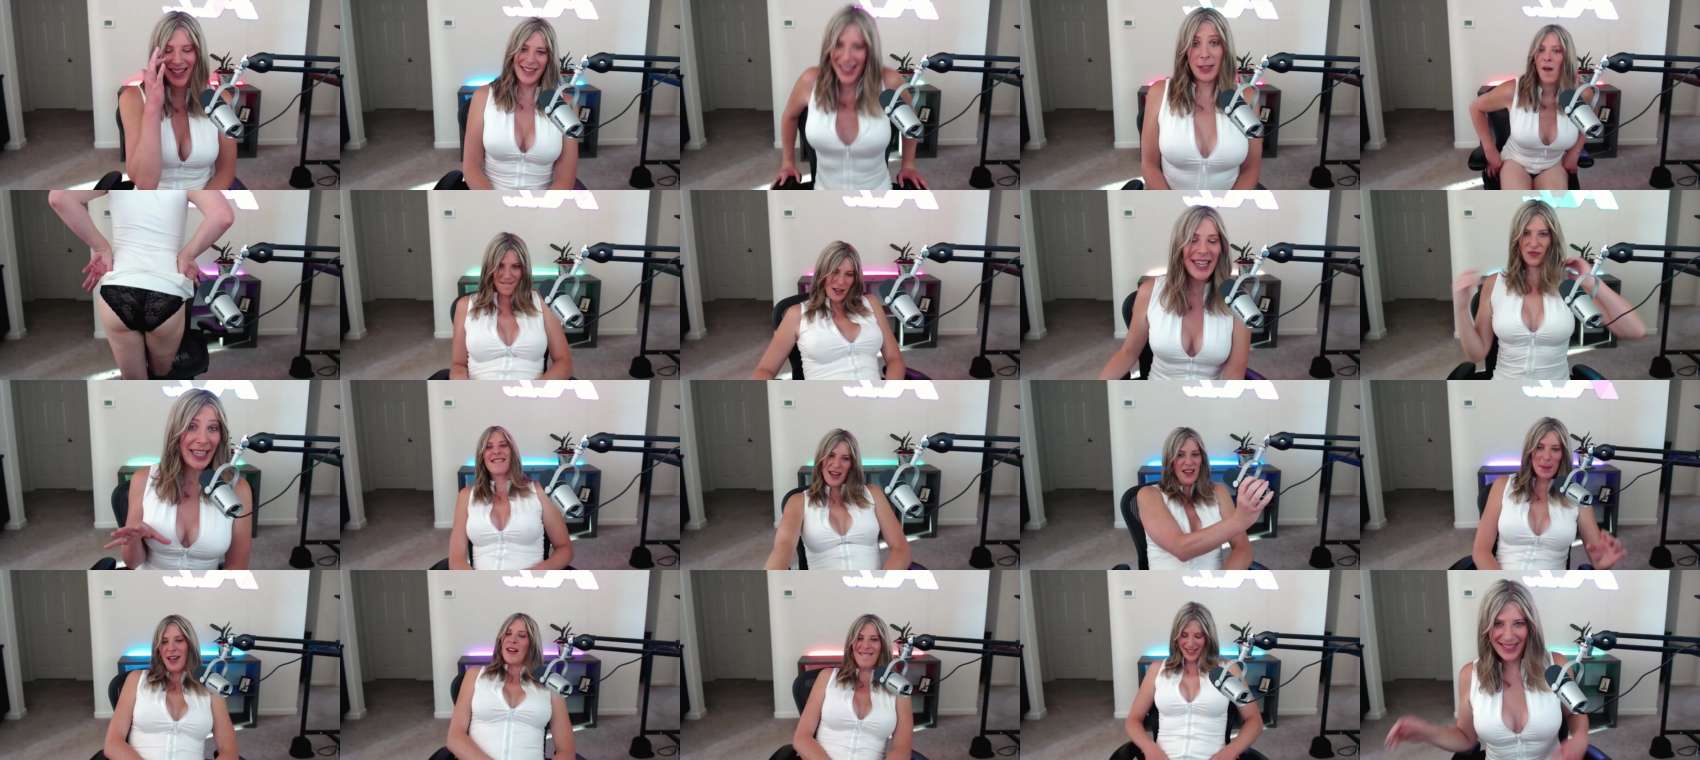 blondecalibabe ts 06-07-2022  trans show